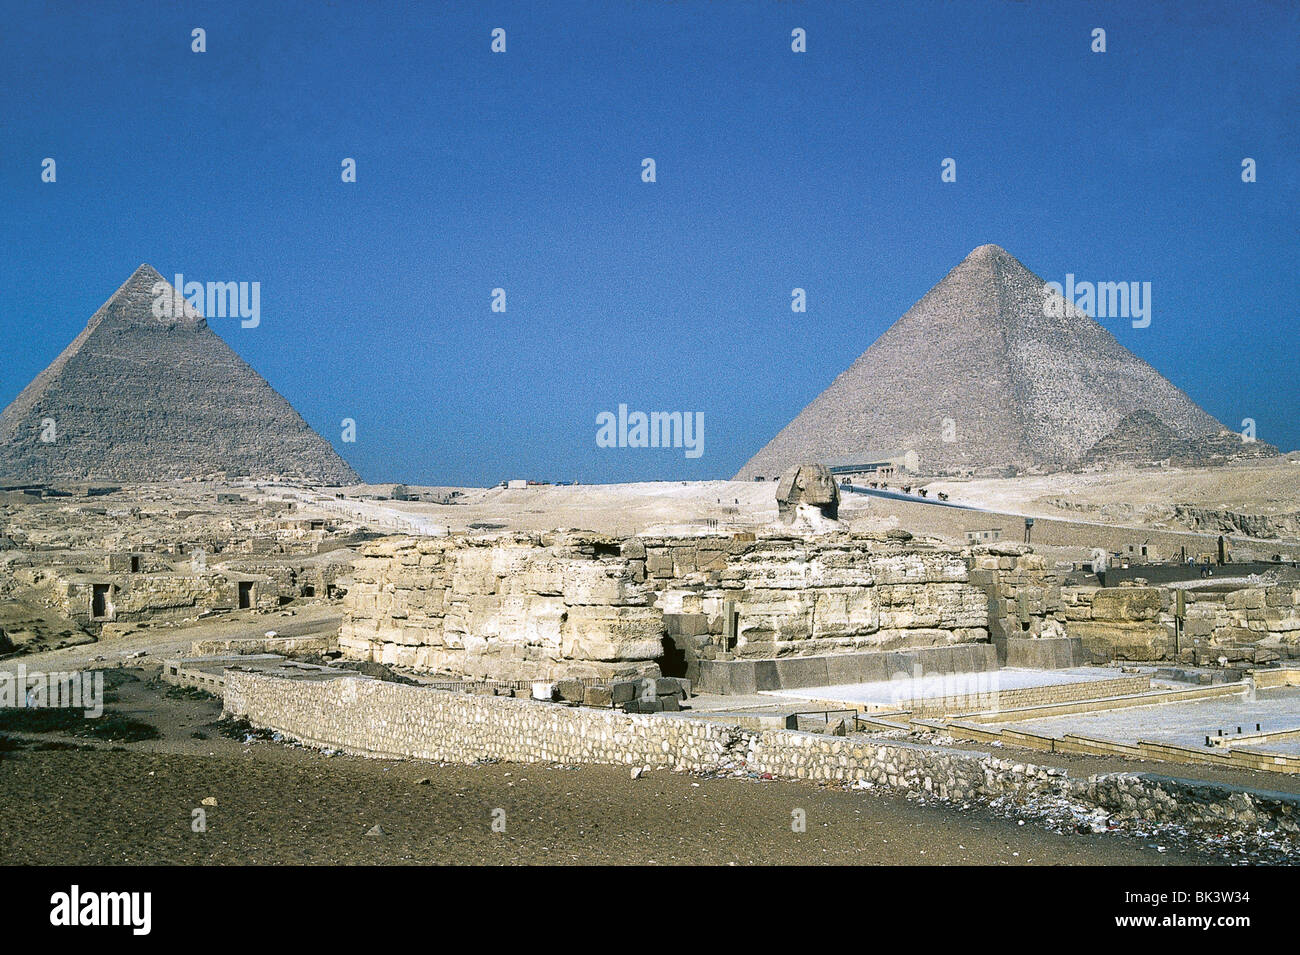 Sphinx, Valley Temple and the Great Pyramids of Giza, Egypt Stock Photo